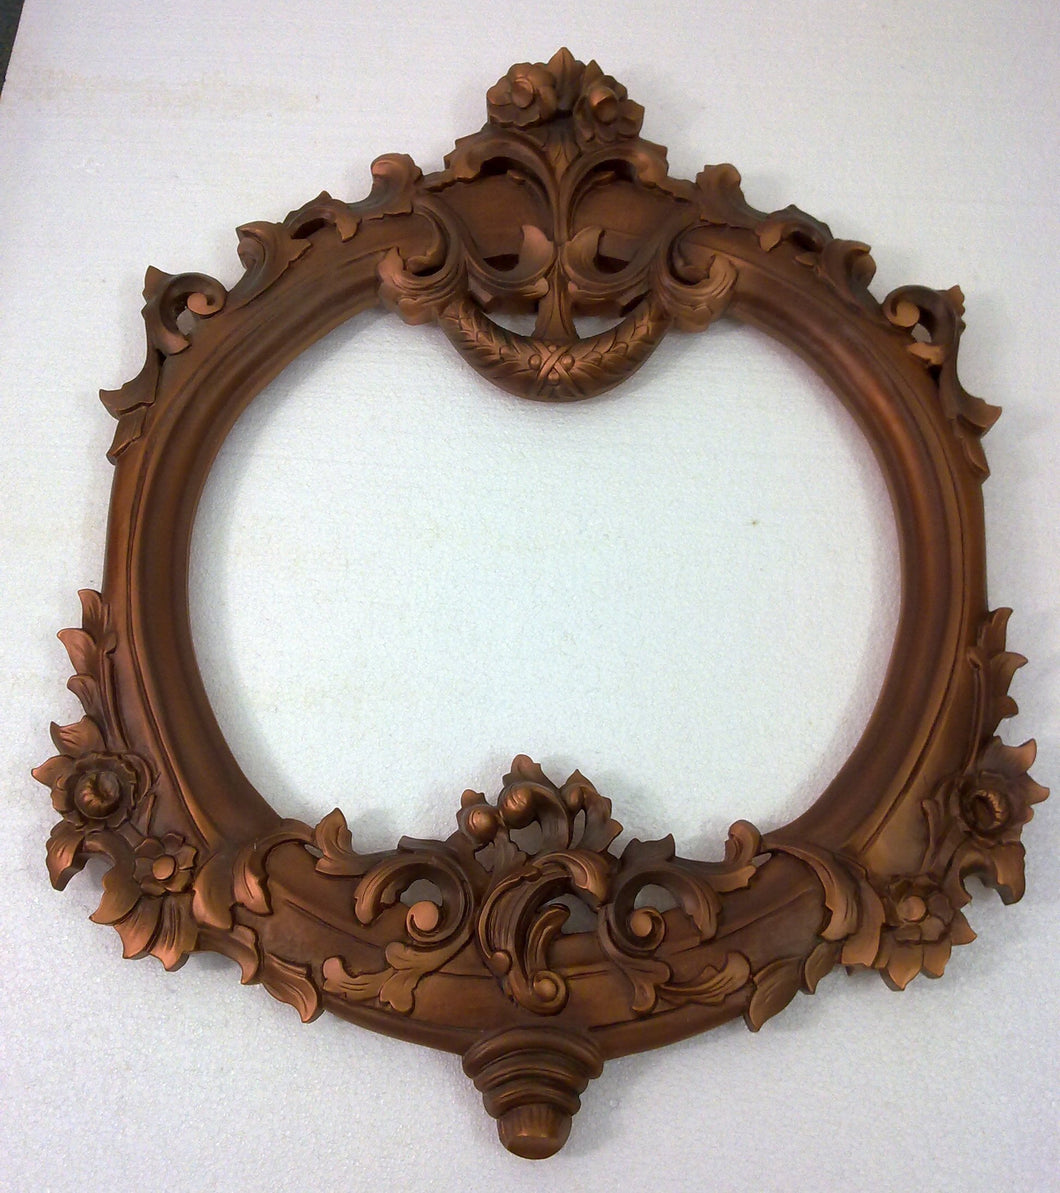 W45 Handcrafted Carved Wood Rustic Copper Floral Wall Mounting Mirror Frame